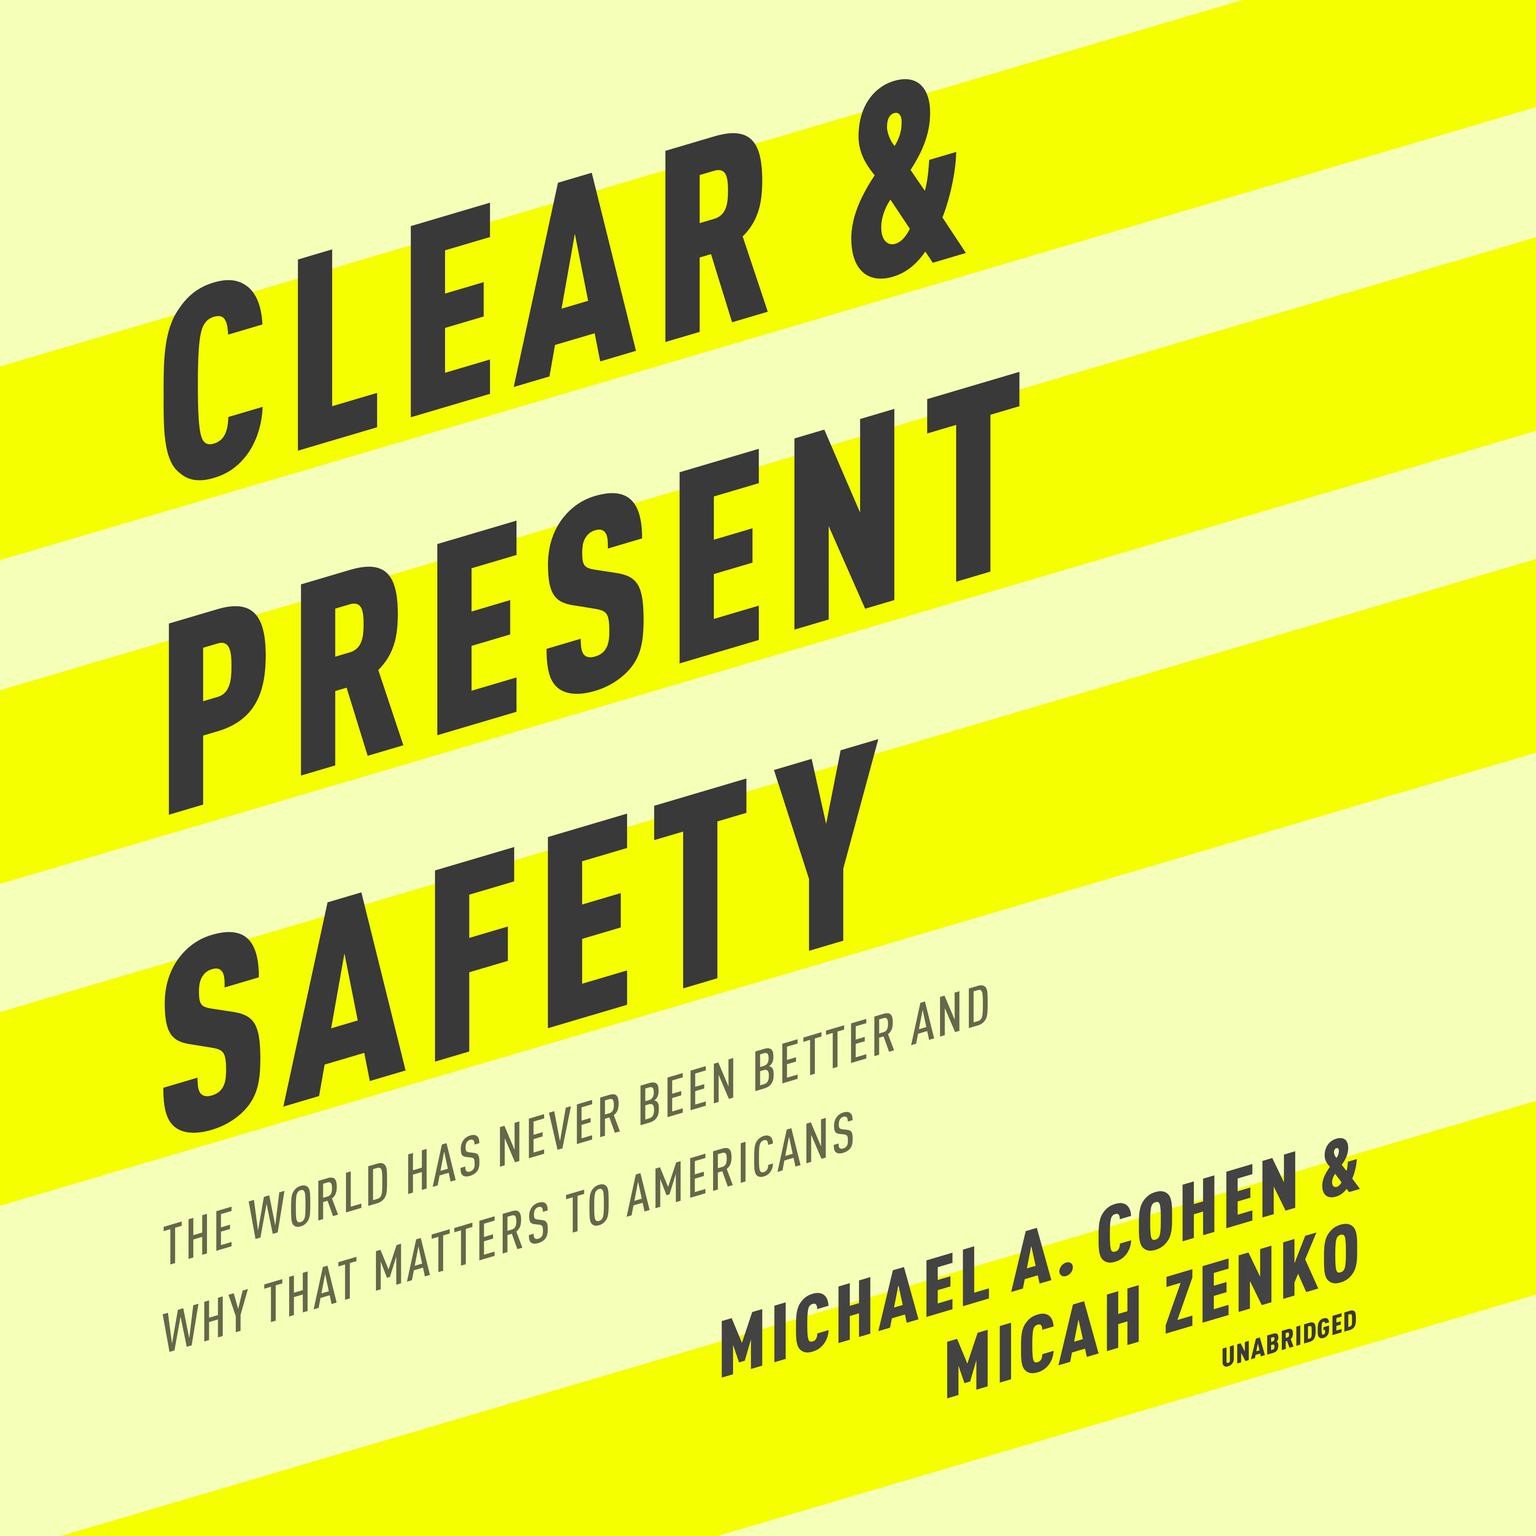 Clear and Present Safety: The World Has Never Been Better and Why That Matters to Americans Audiobook, by Michael A. Cohen